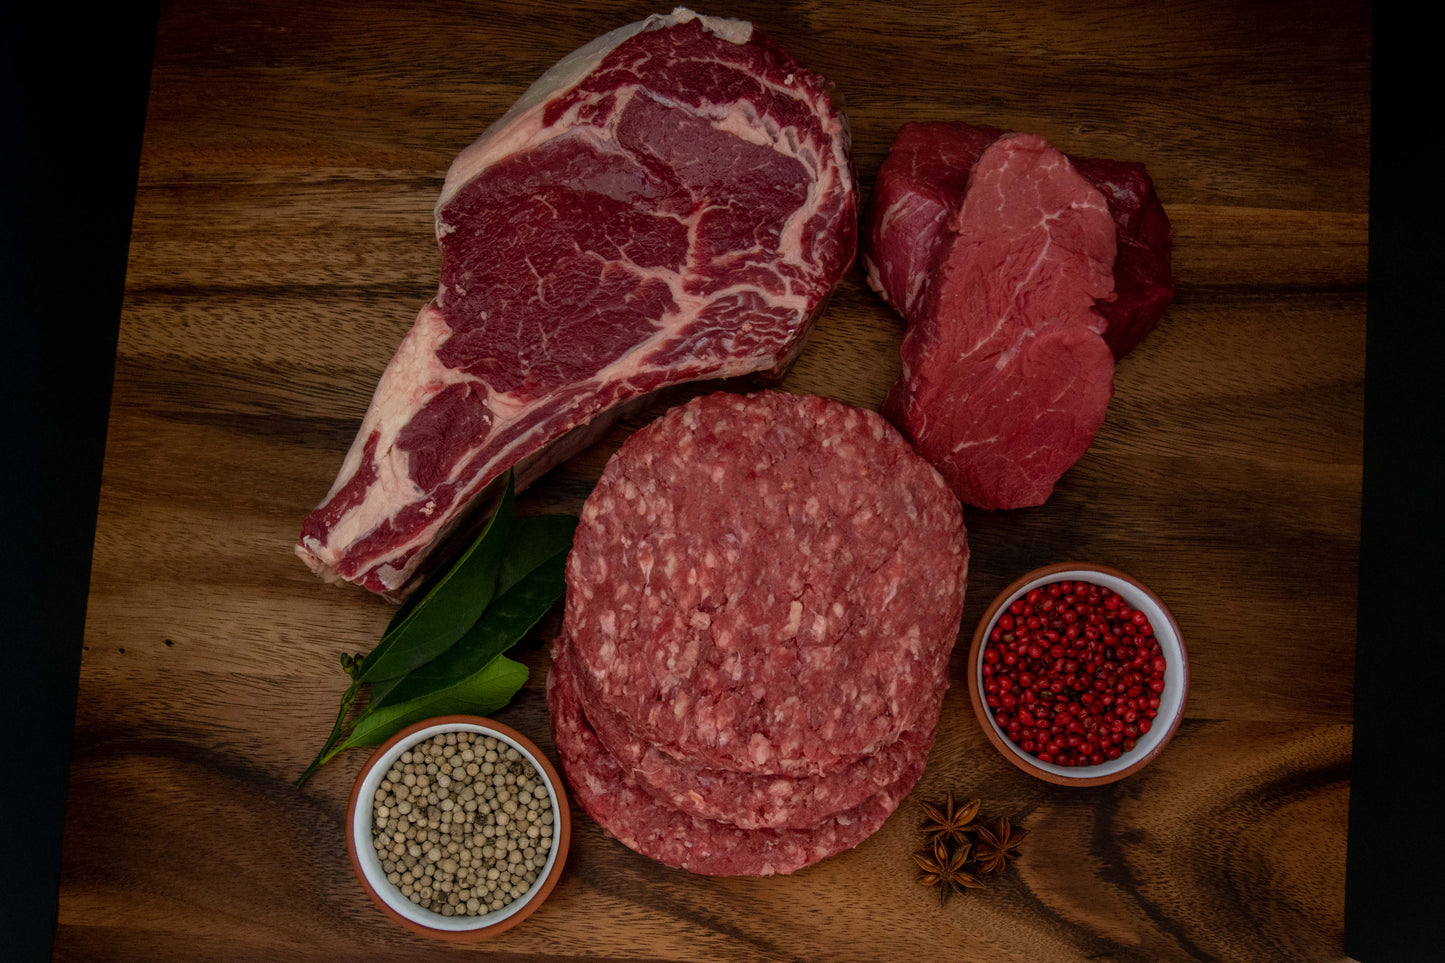 The Meat Box You Don't Have to Share